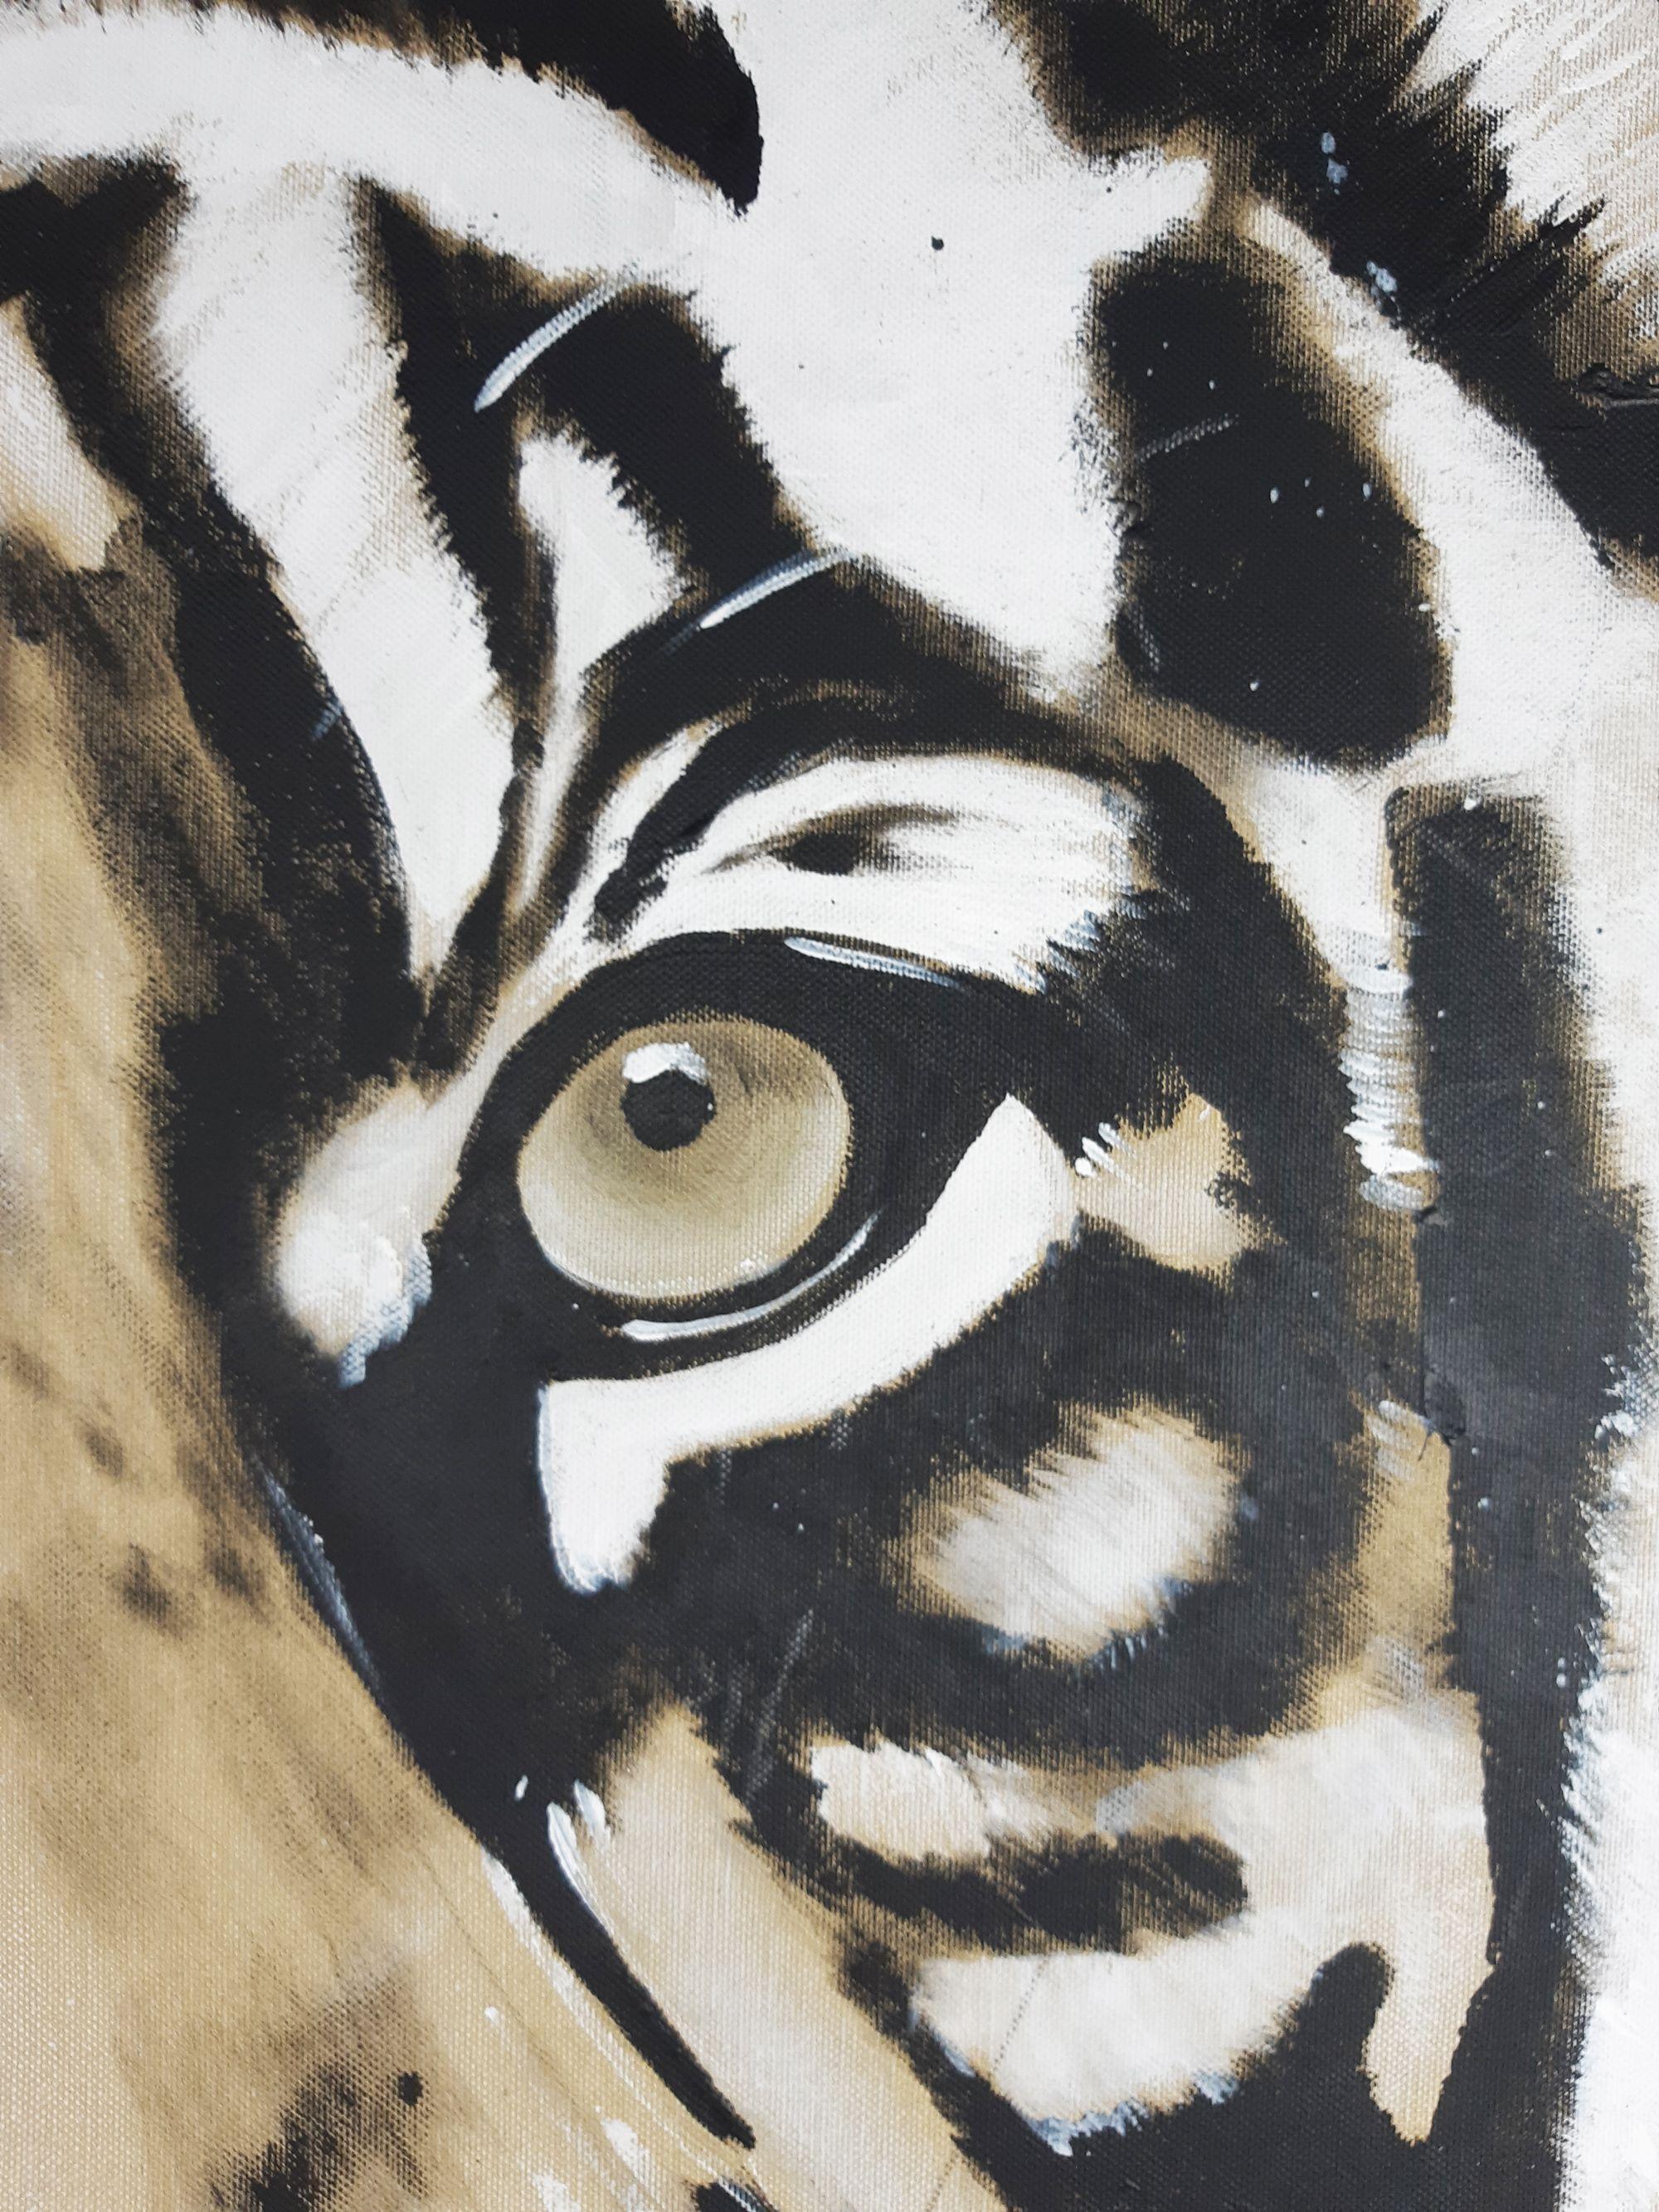 TIGER #5 - Big Cat, Painting, Acrylic on Canvas For Sale 4